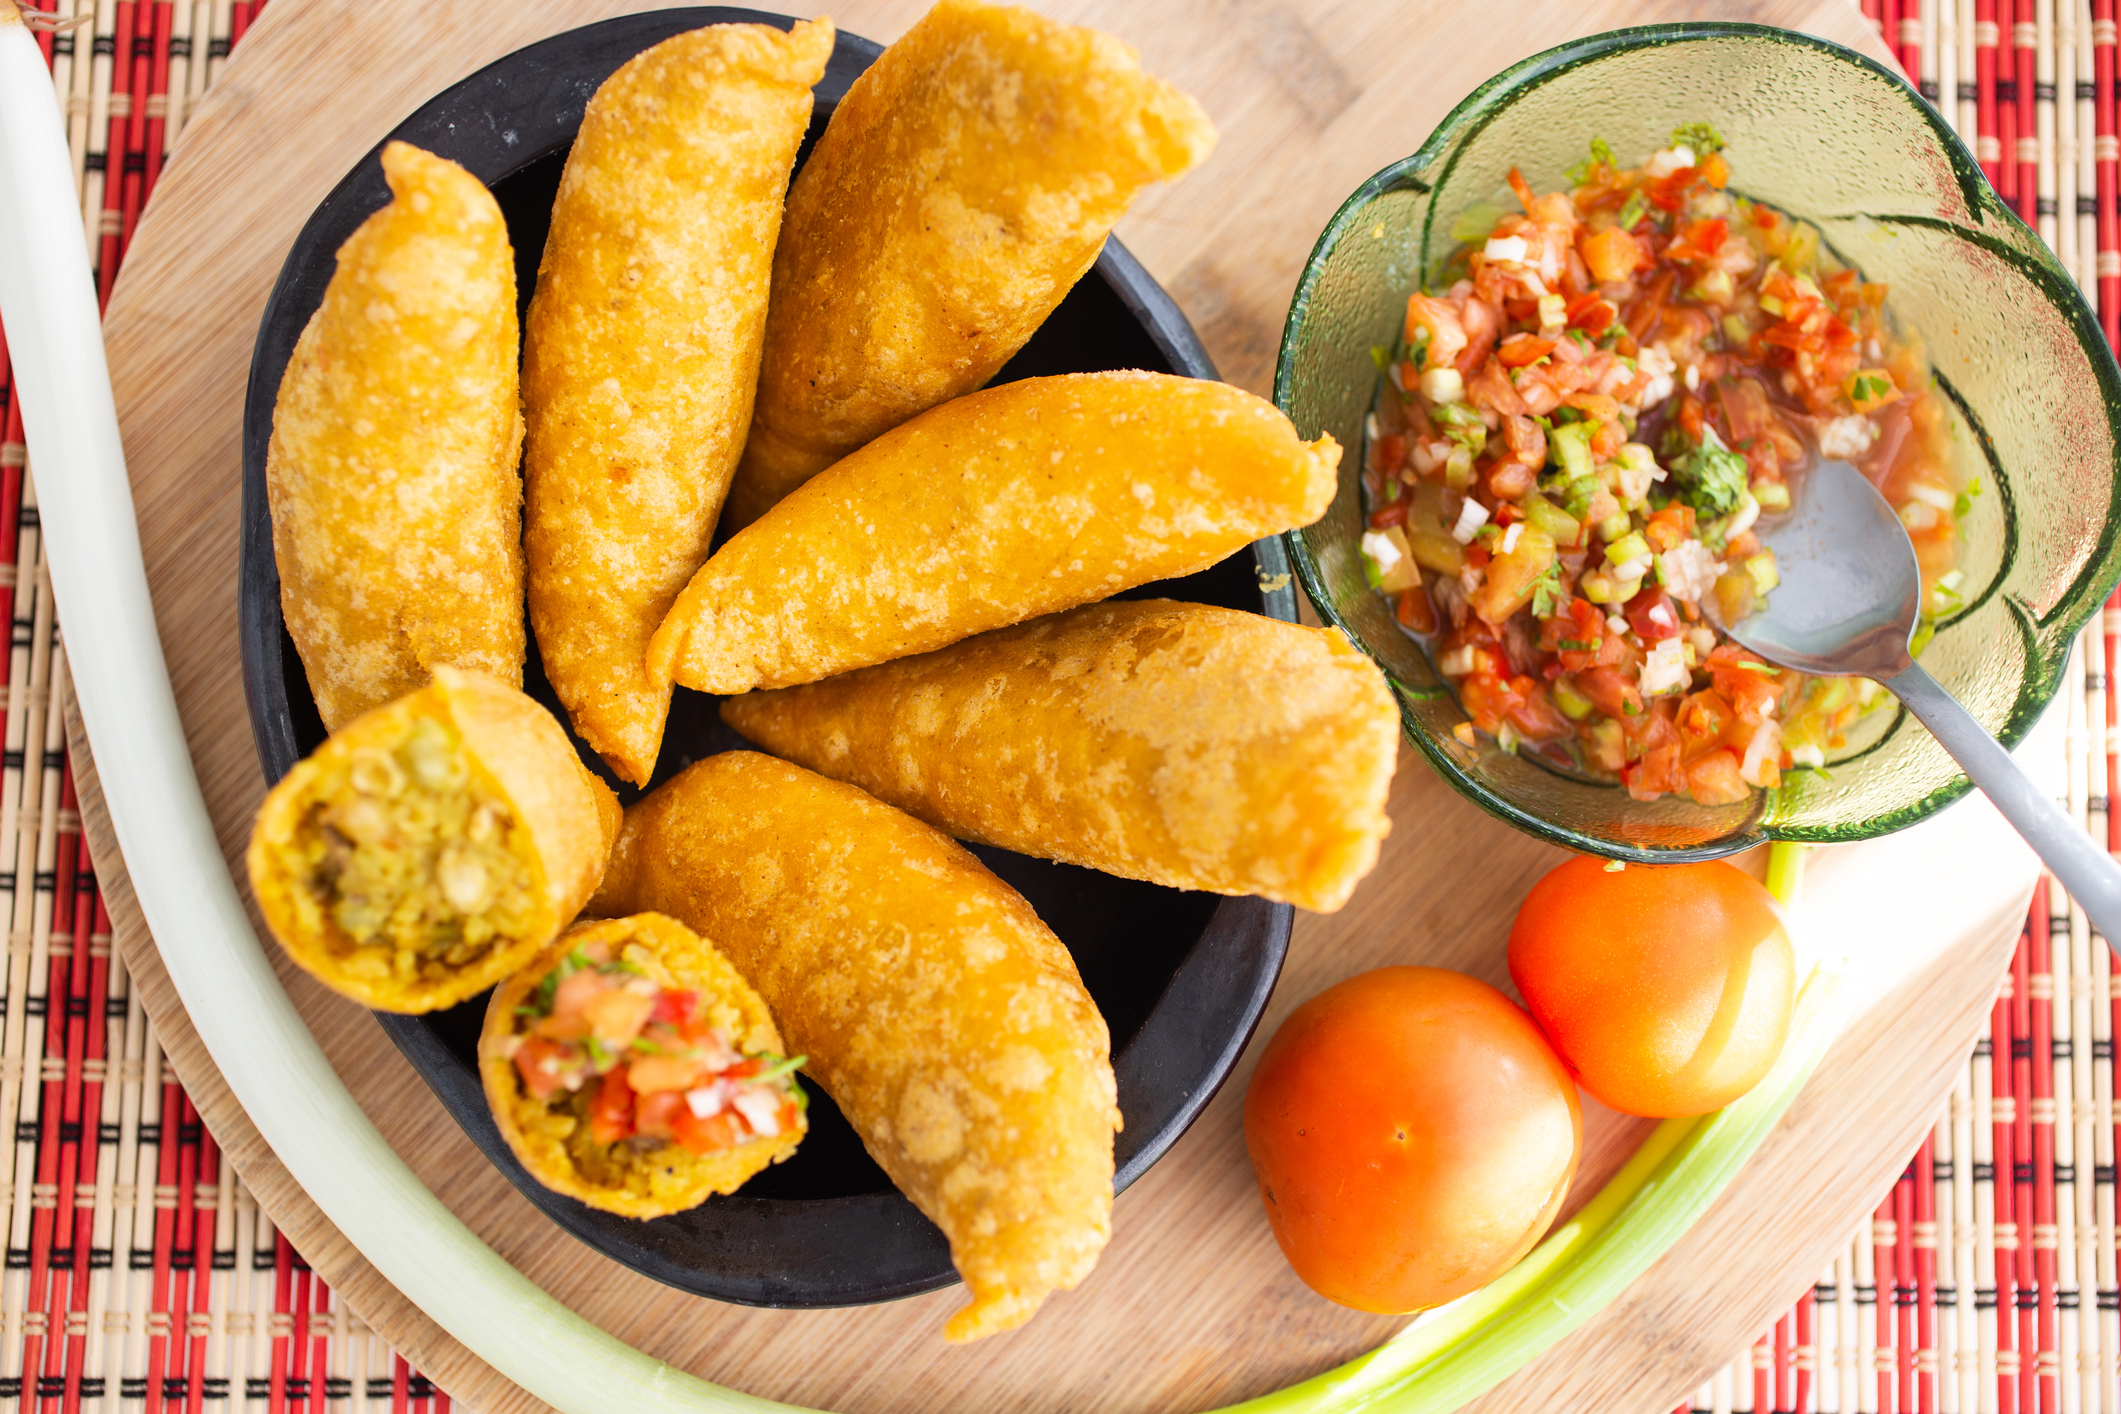 A plate of empanadas with one cut open, alongside a bowl of salsa and fresh tomatoes